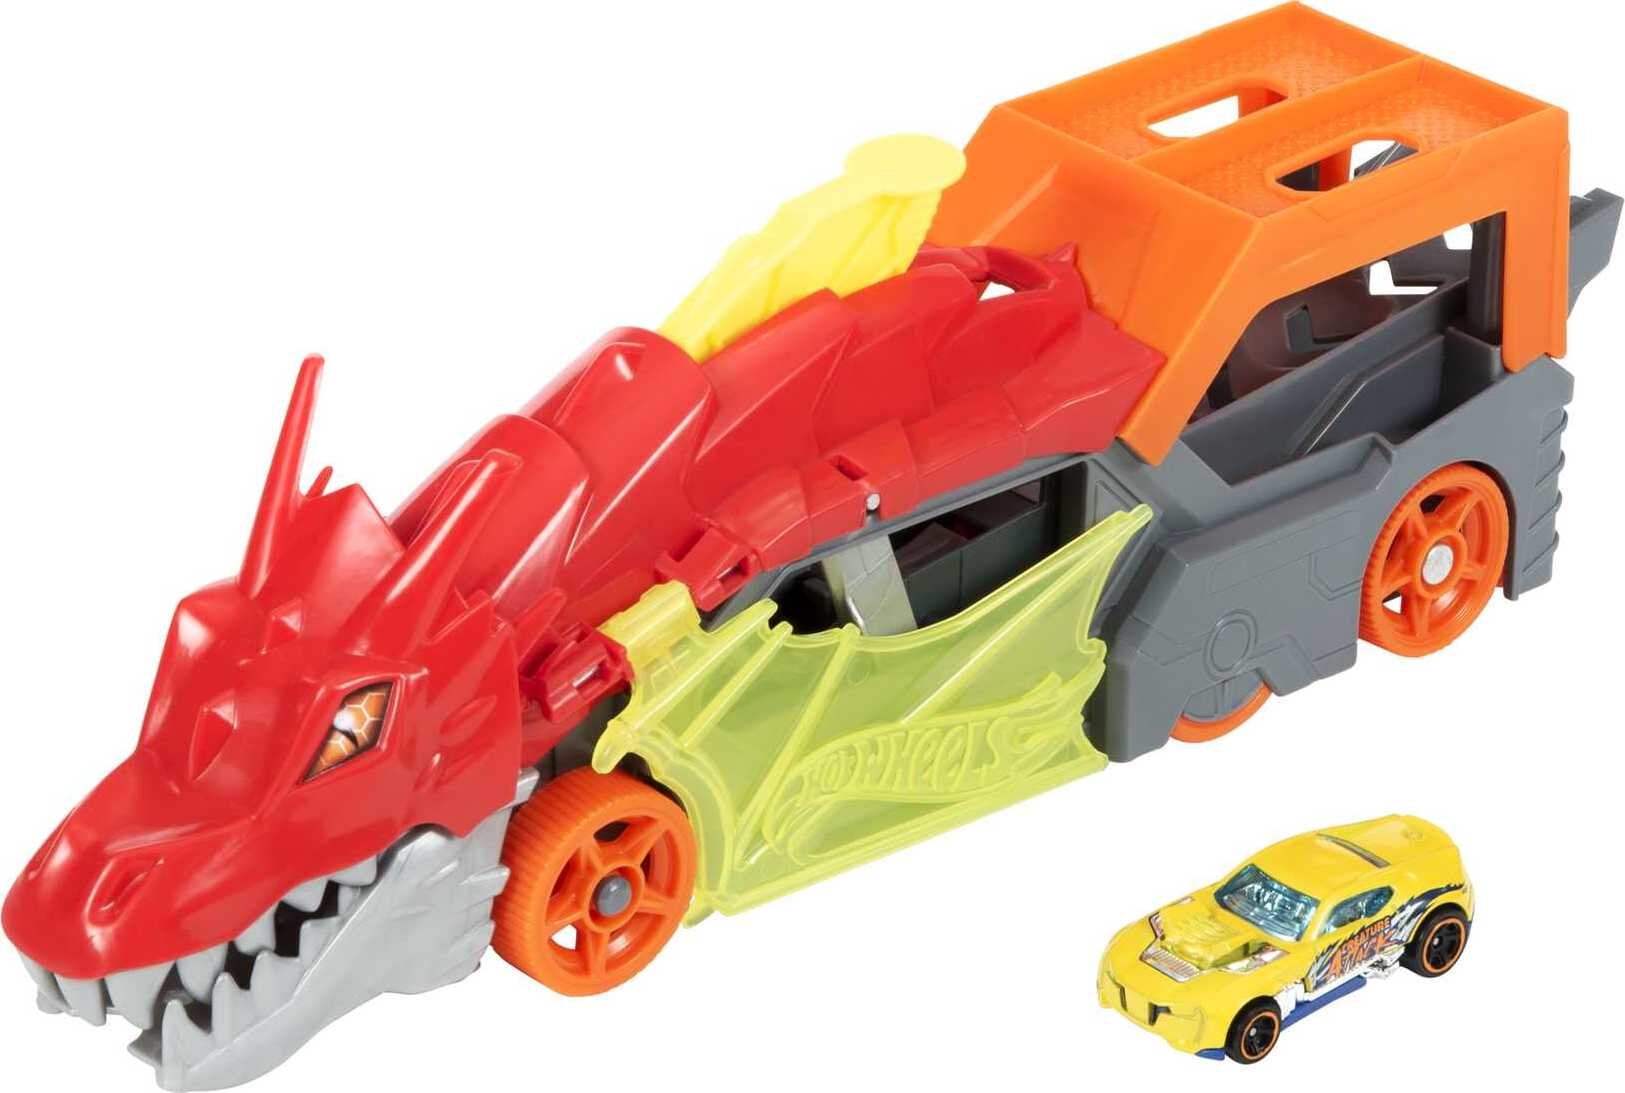 Hot Wheels City Dragon Launch Transporter, Spits Cars From Its Mouth, Gift  for Kids 3 Years & Up